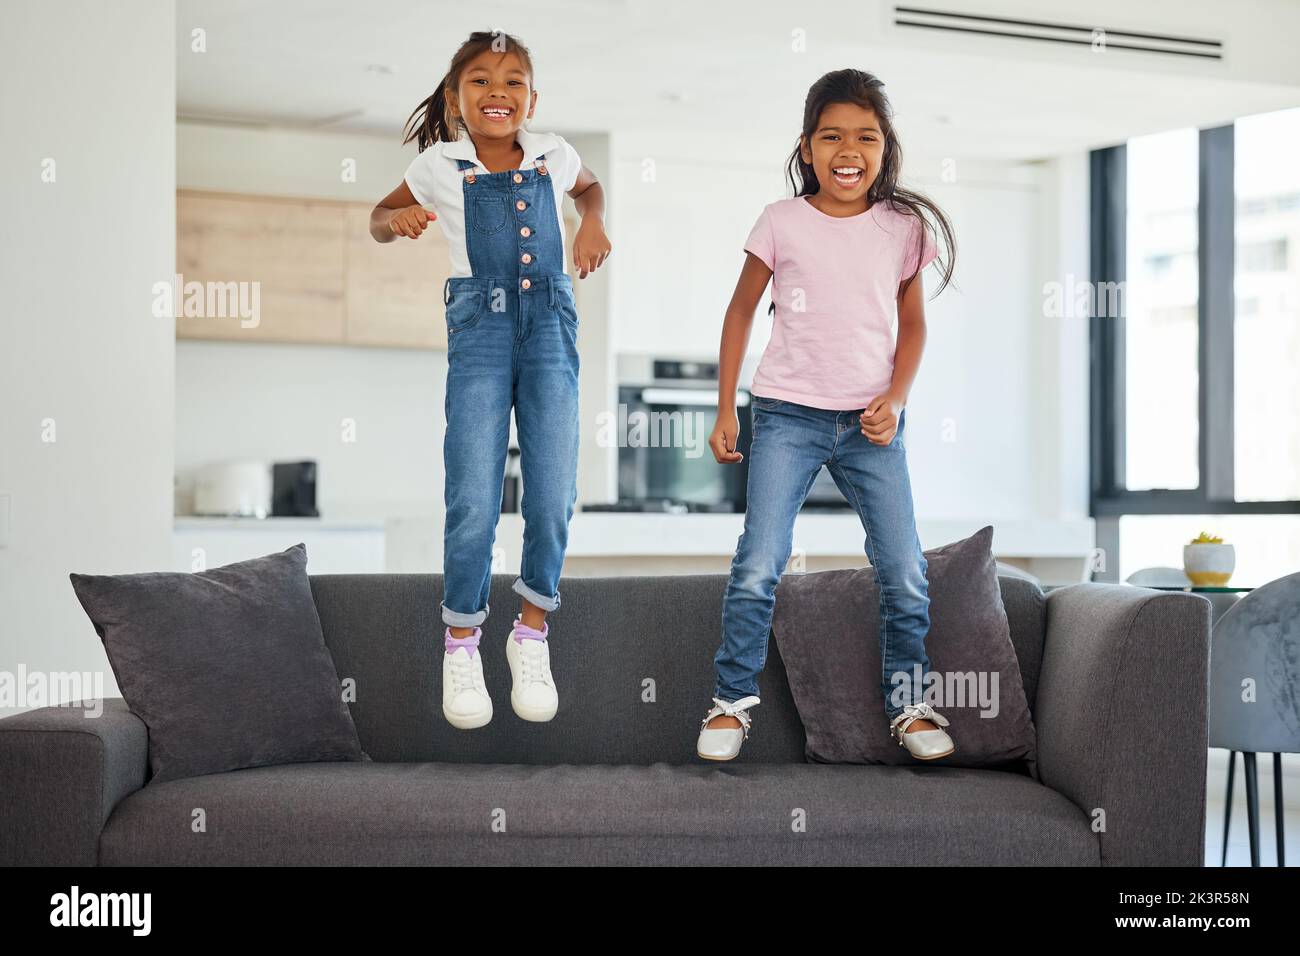 Excited girl kids jumping on living room sofa furniture at home for fun, energy and play games. Portrait crazy, happy and wild young children adhd Stock Photo